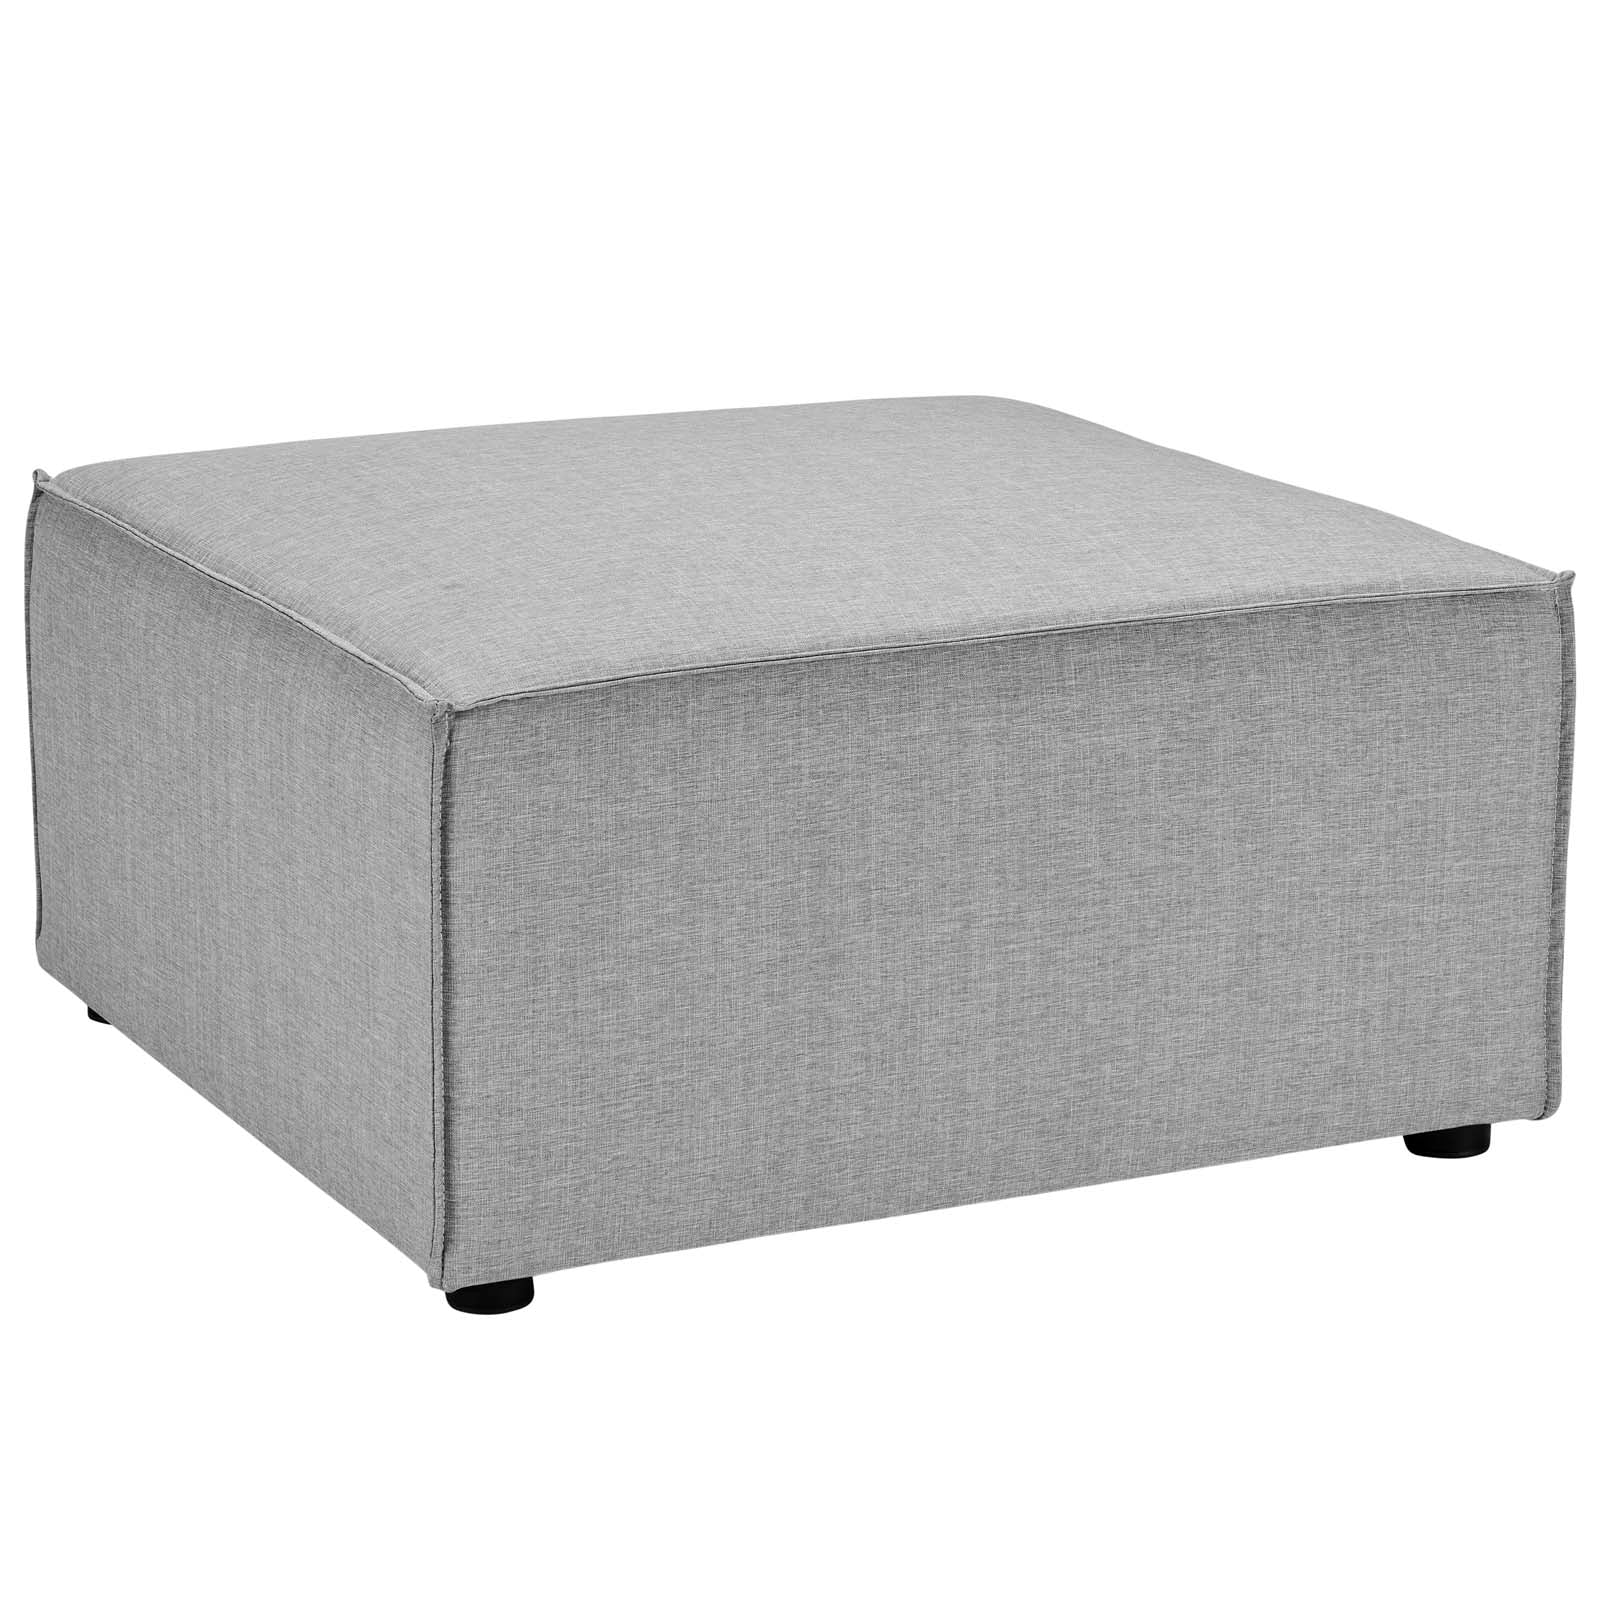 Modway Outdoor Stools & Benches - Saybrook Outdoor Patio Upholstered Sectional Sofa Ottoman Gray